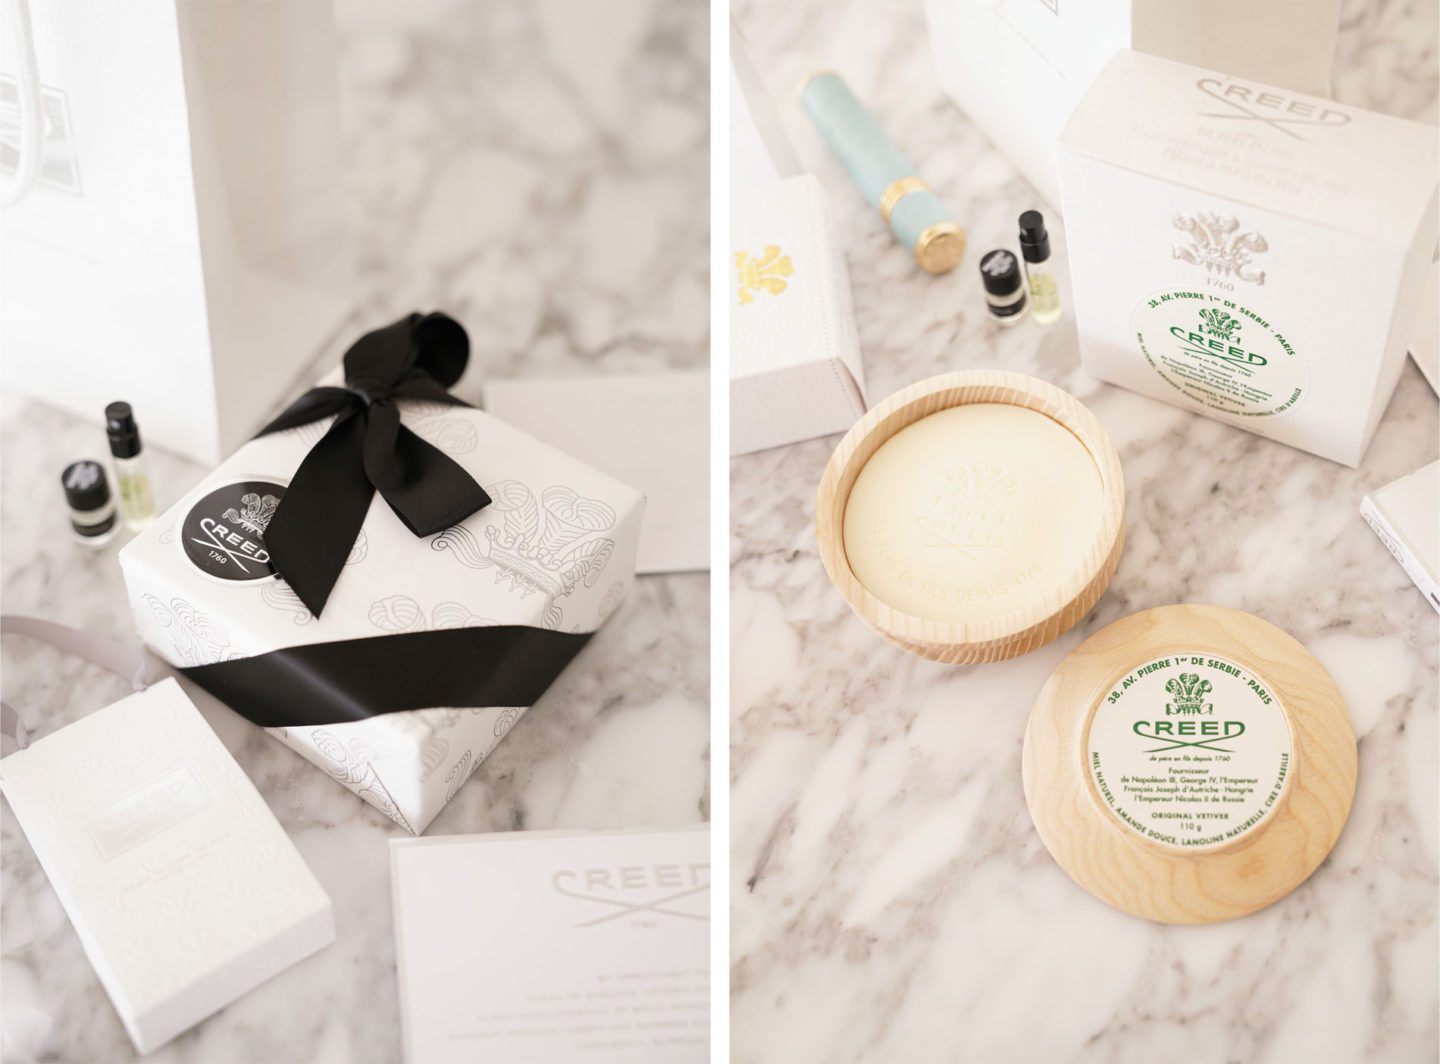 Creed Original Vetiver Shaving Soap and Bowl | The Beauty Look Book